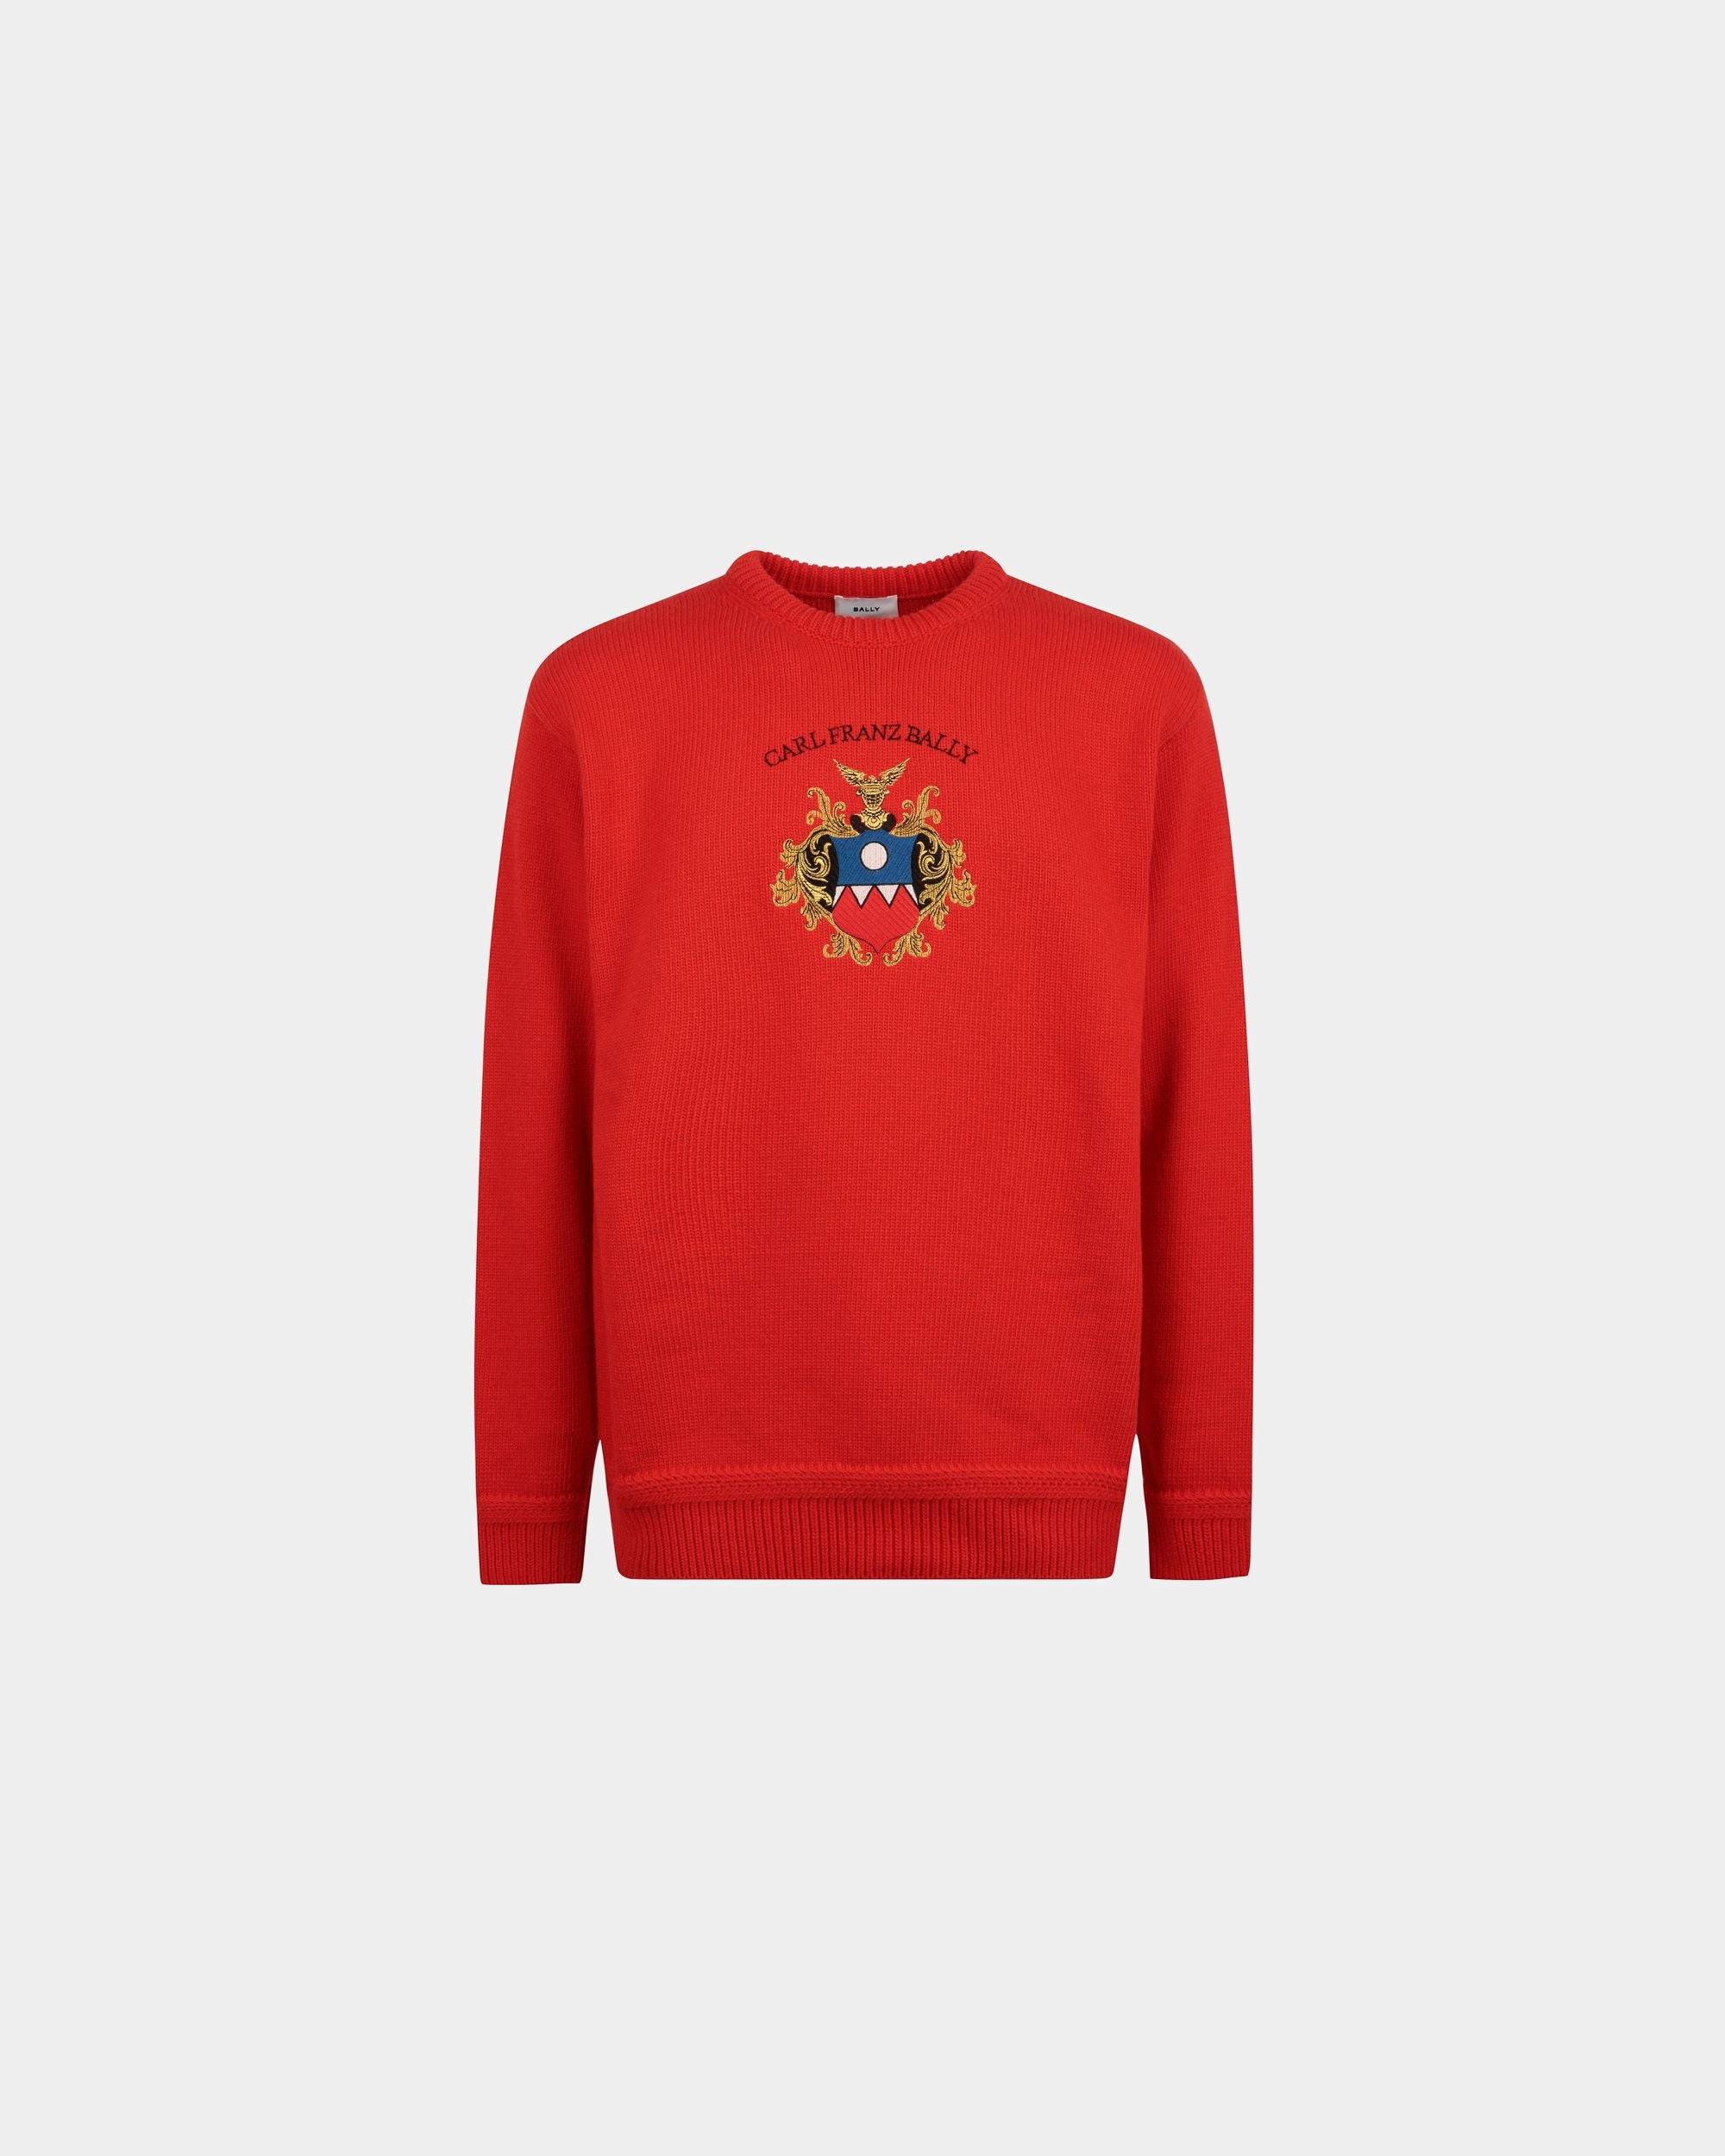 Men's Sweater In Red Wool | Bally | Still Life Front